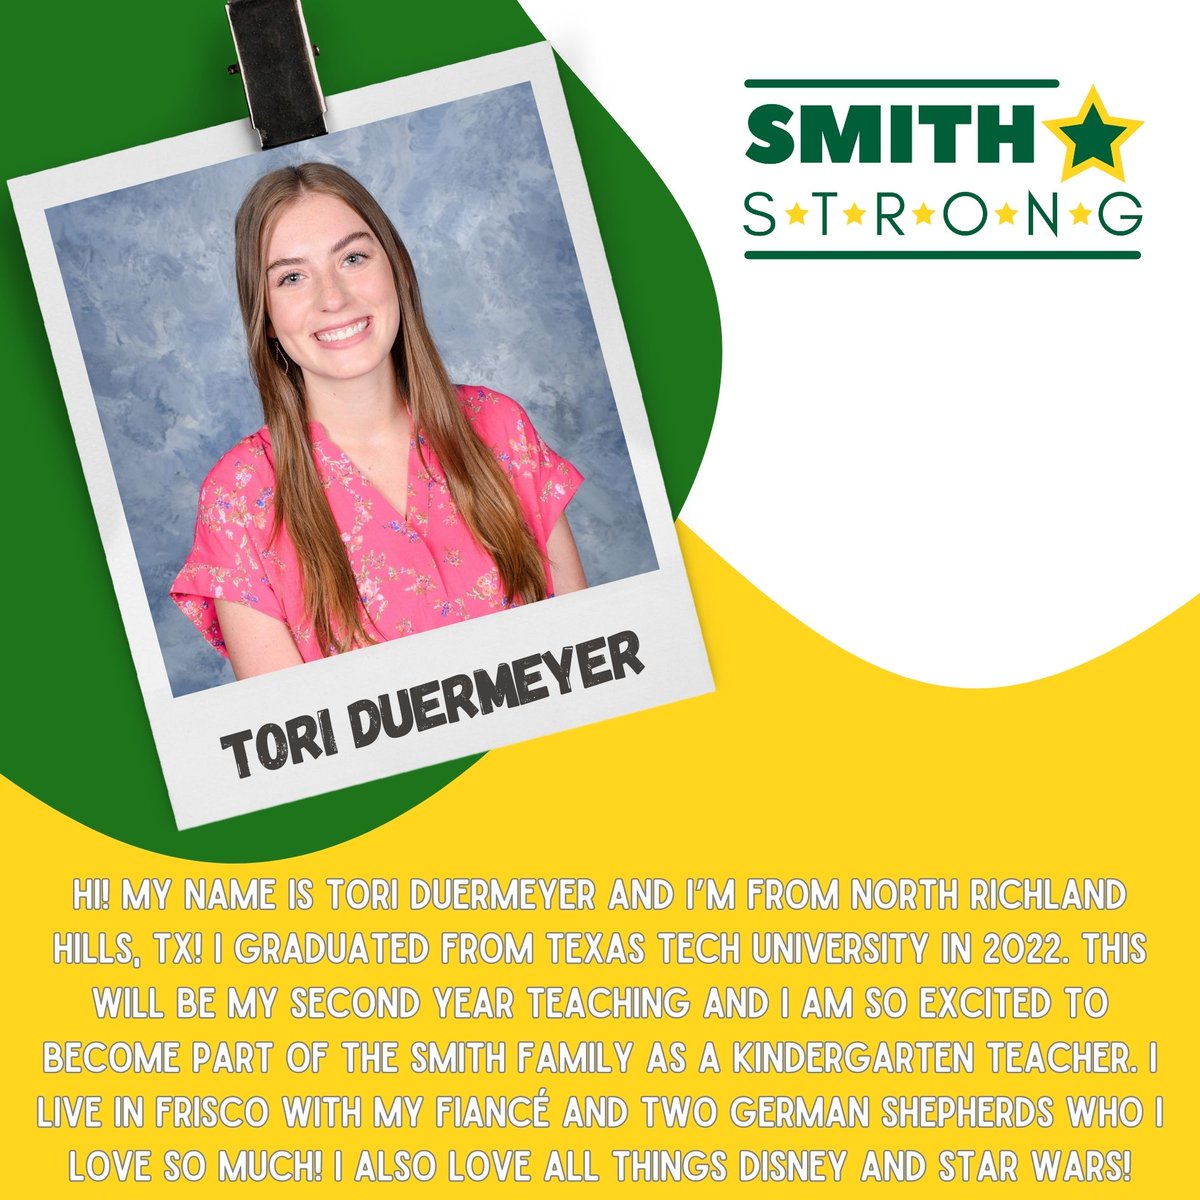 #SMITHSTRONG💪, help us welcome Tori Duermeyer to Smith Elementary! She will be joining our Kindergarten team here at Smith Elementary!💪💚⭐️